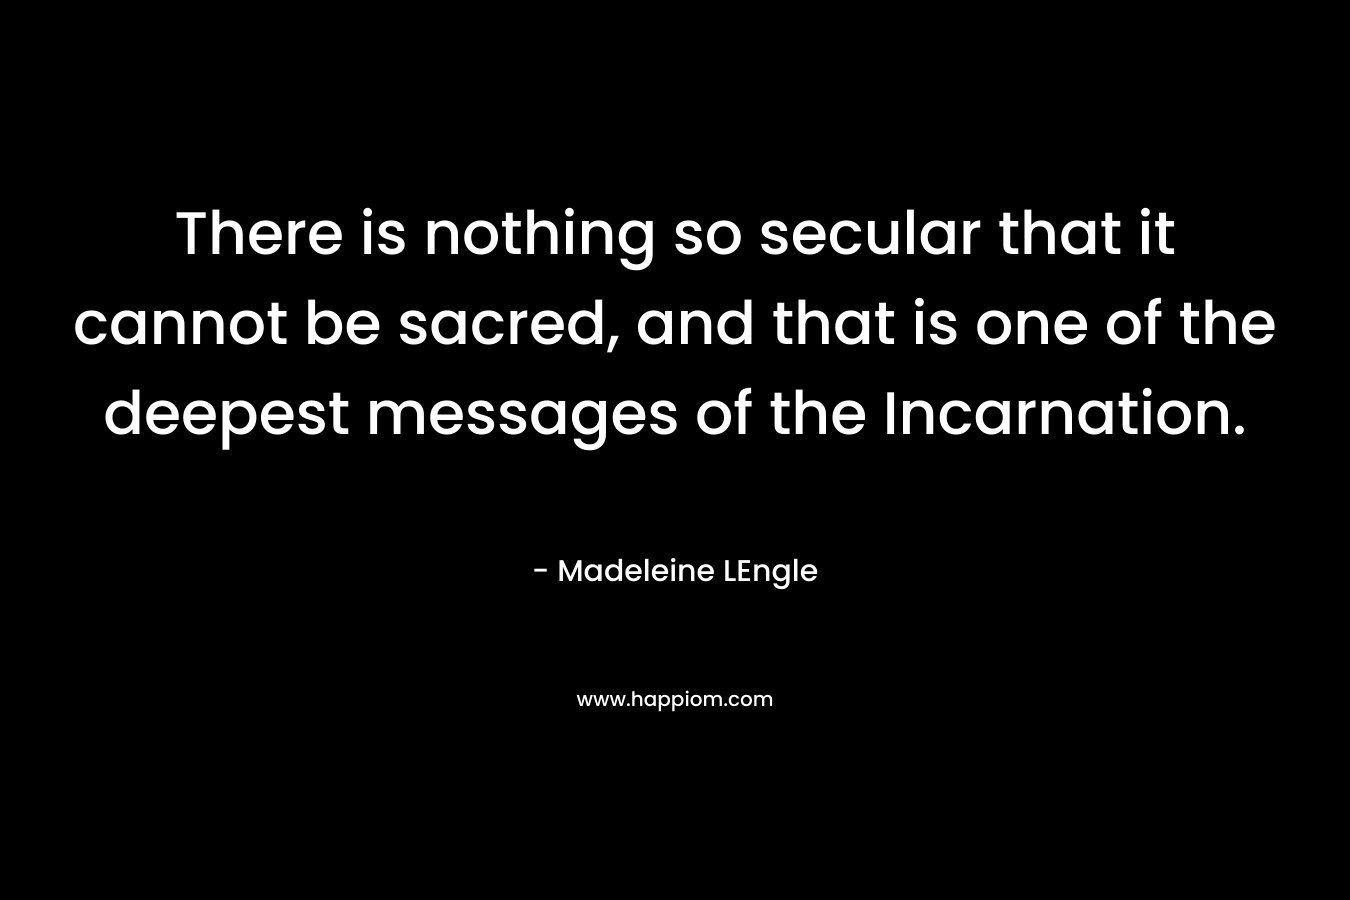 There is nothing so secular that it cannot be sacred, and that is one of the deepest messages of the Incarnation. – Madeleine LEngle